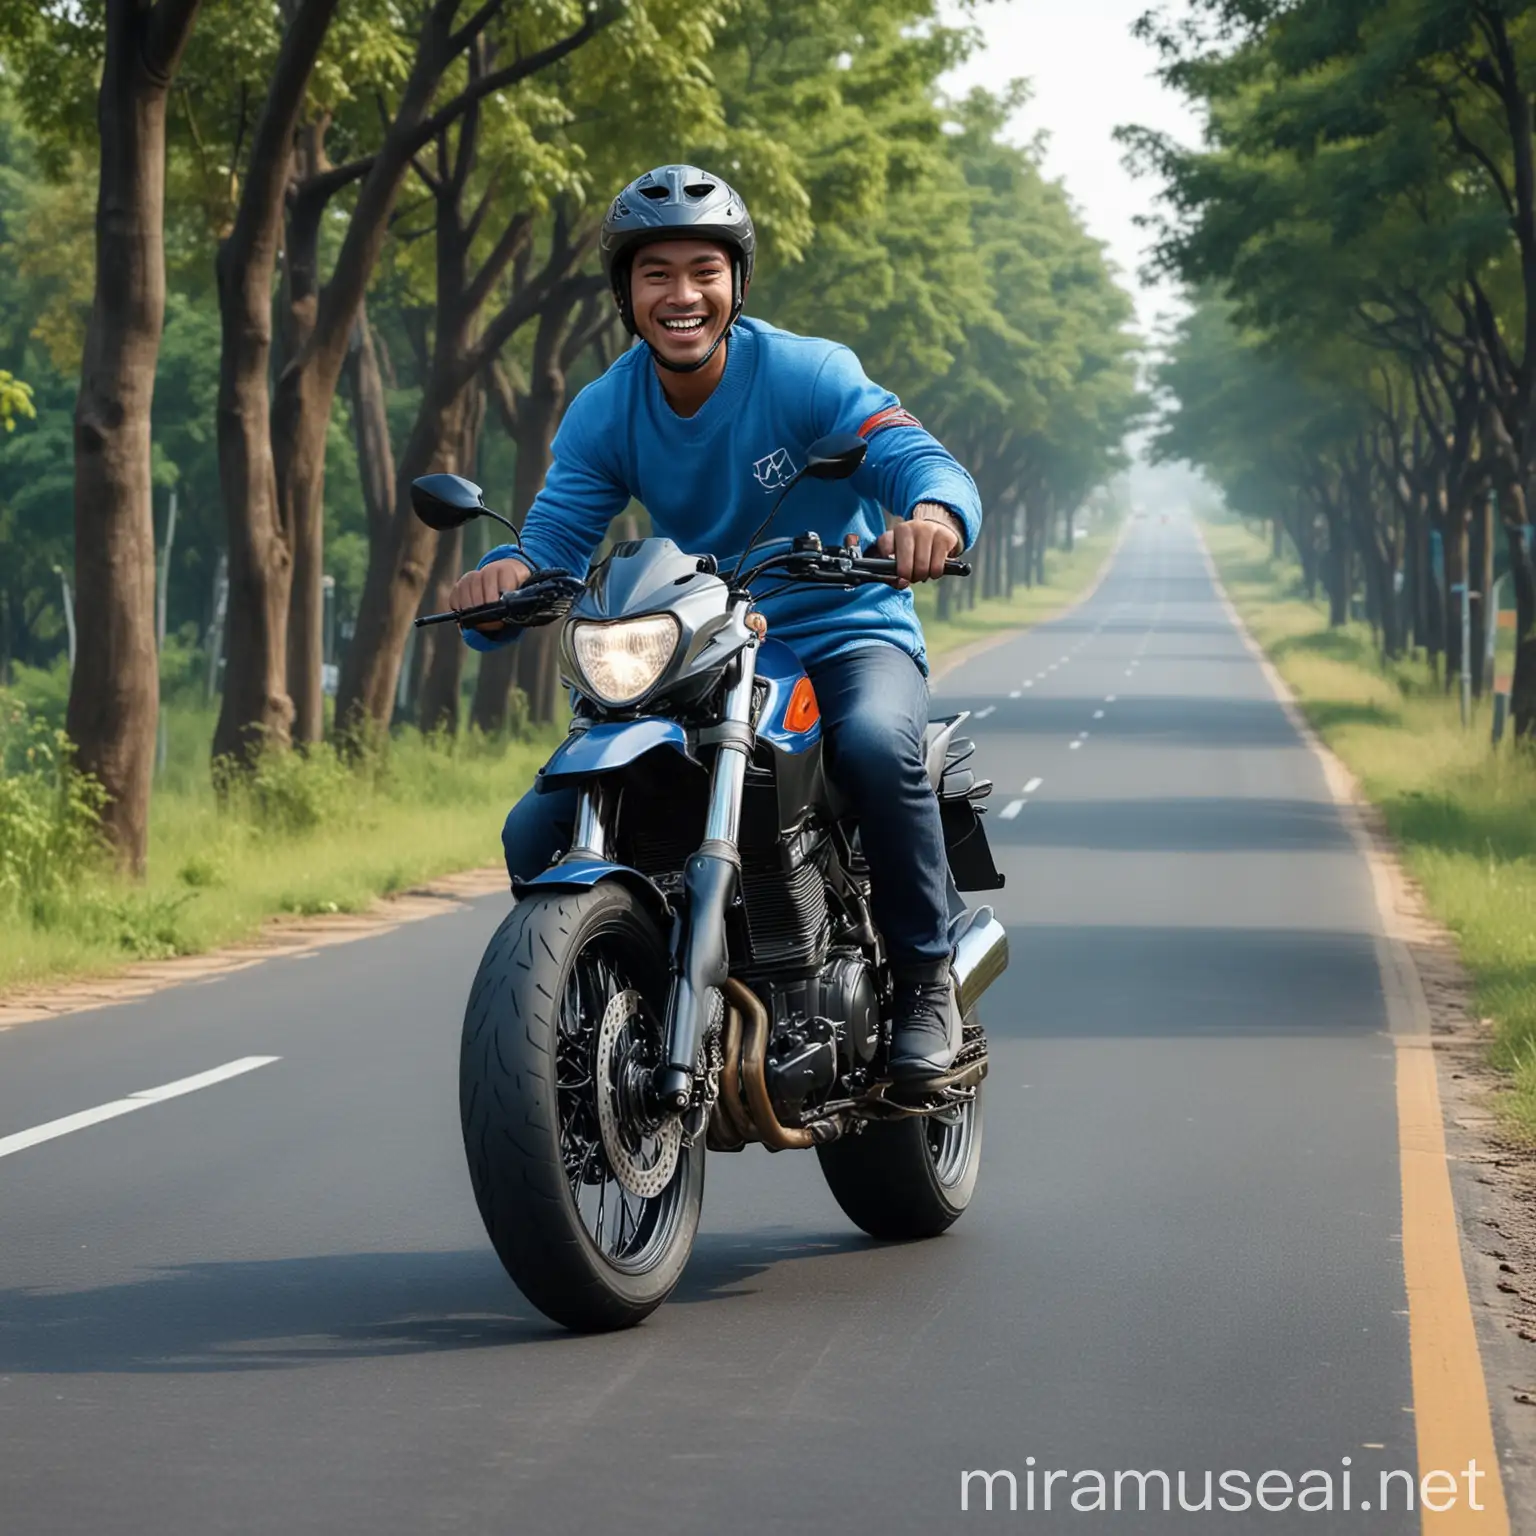 Smiling Indonesian Man Riding Sports Motorcycle in Blue Sweater Doing Wheelie on Straight Road